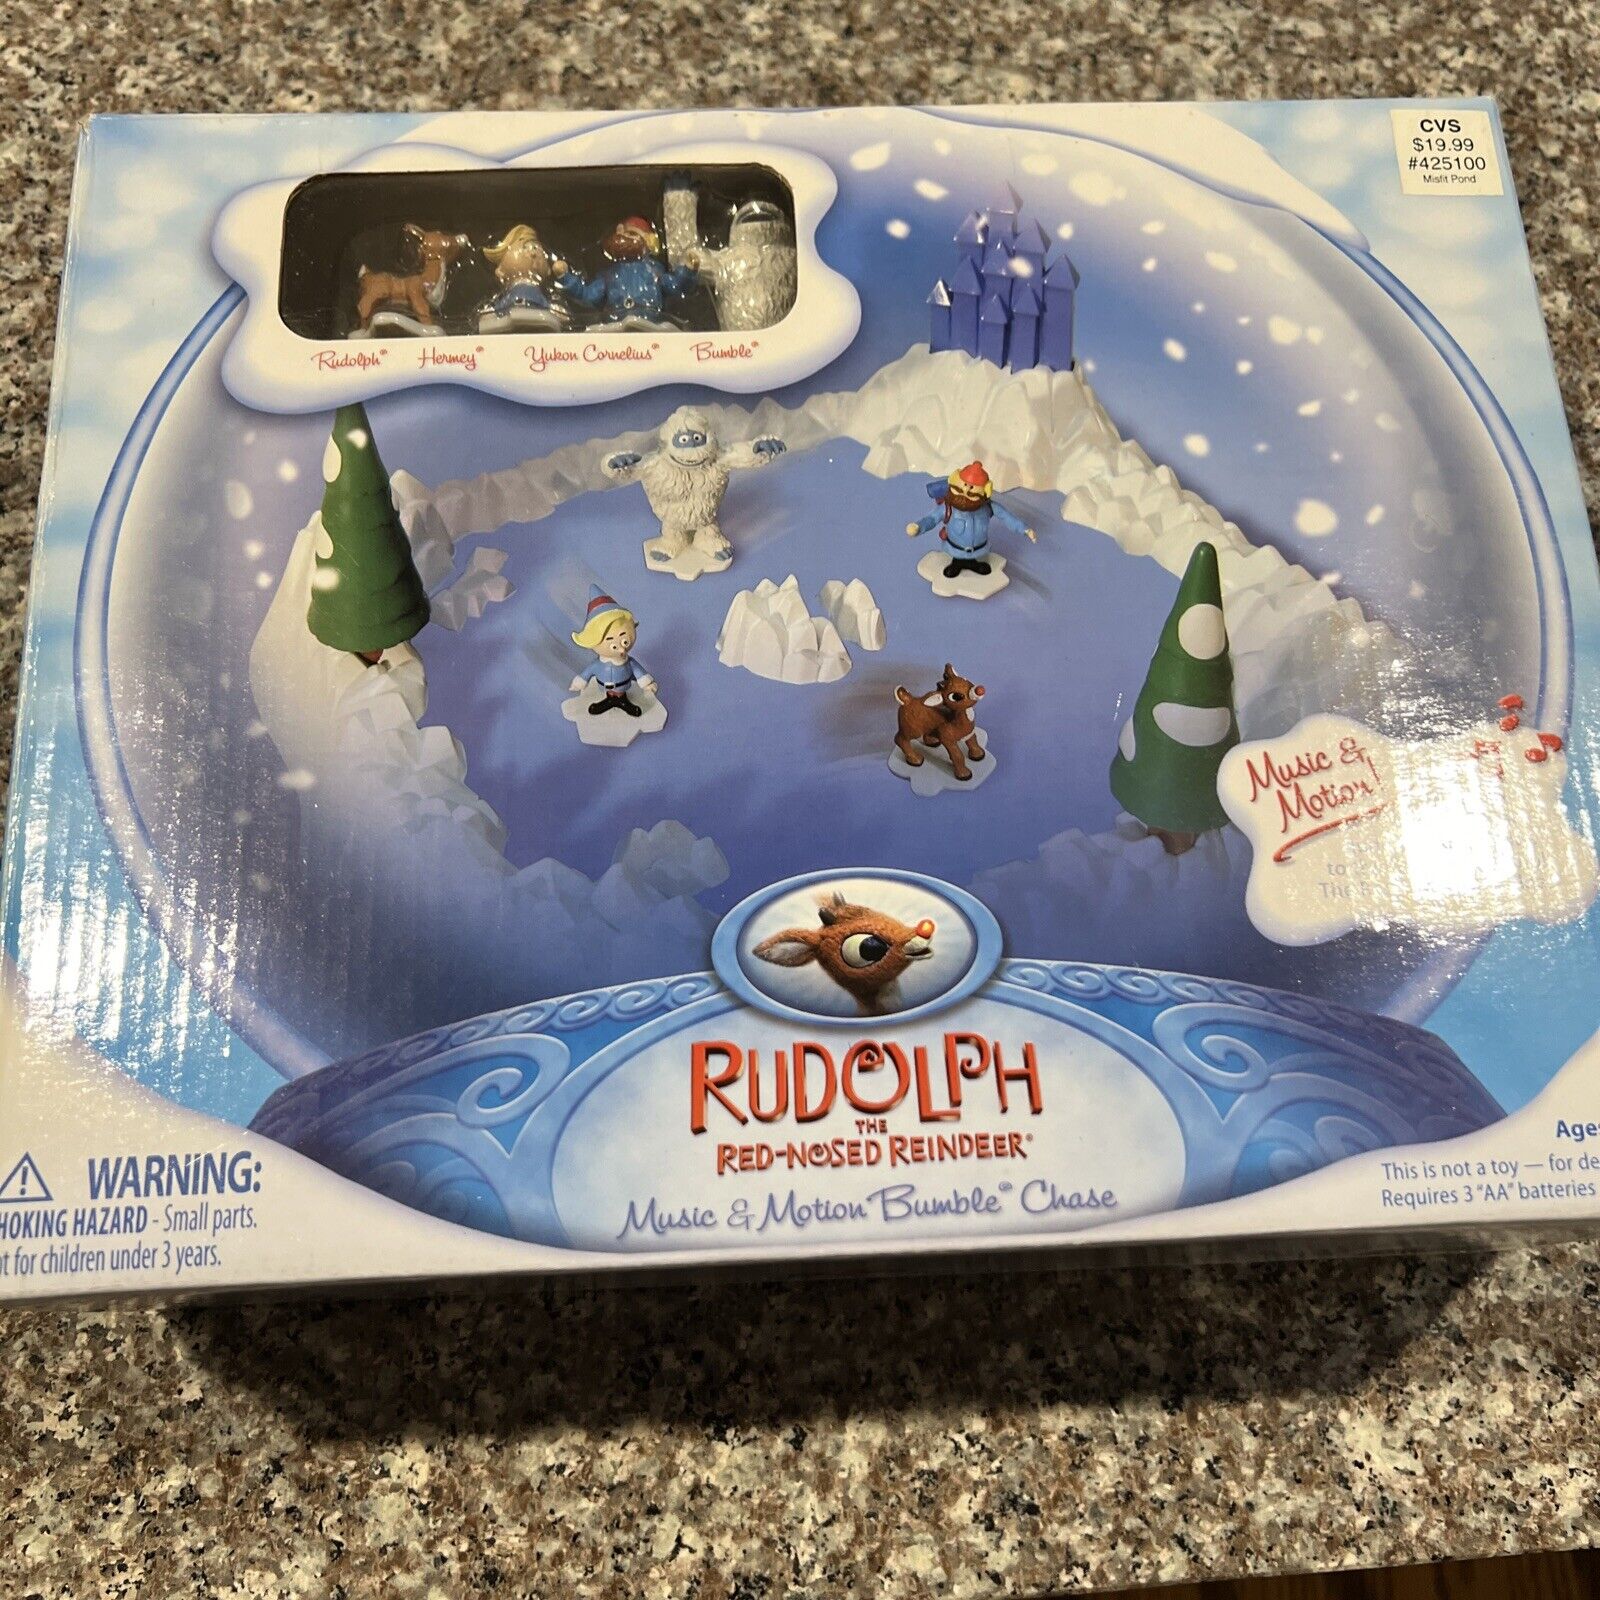 Rudolph Red Nose Reindeer Music & Motion Bumble Chase Misfit Pond In Box